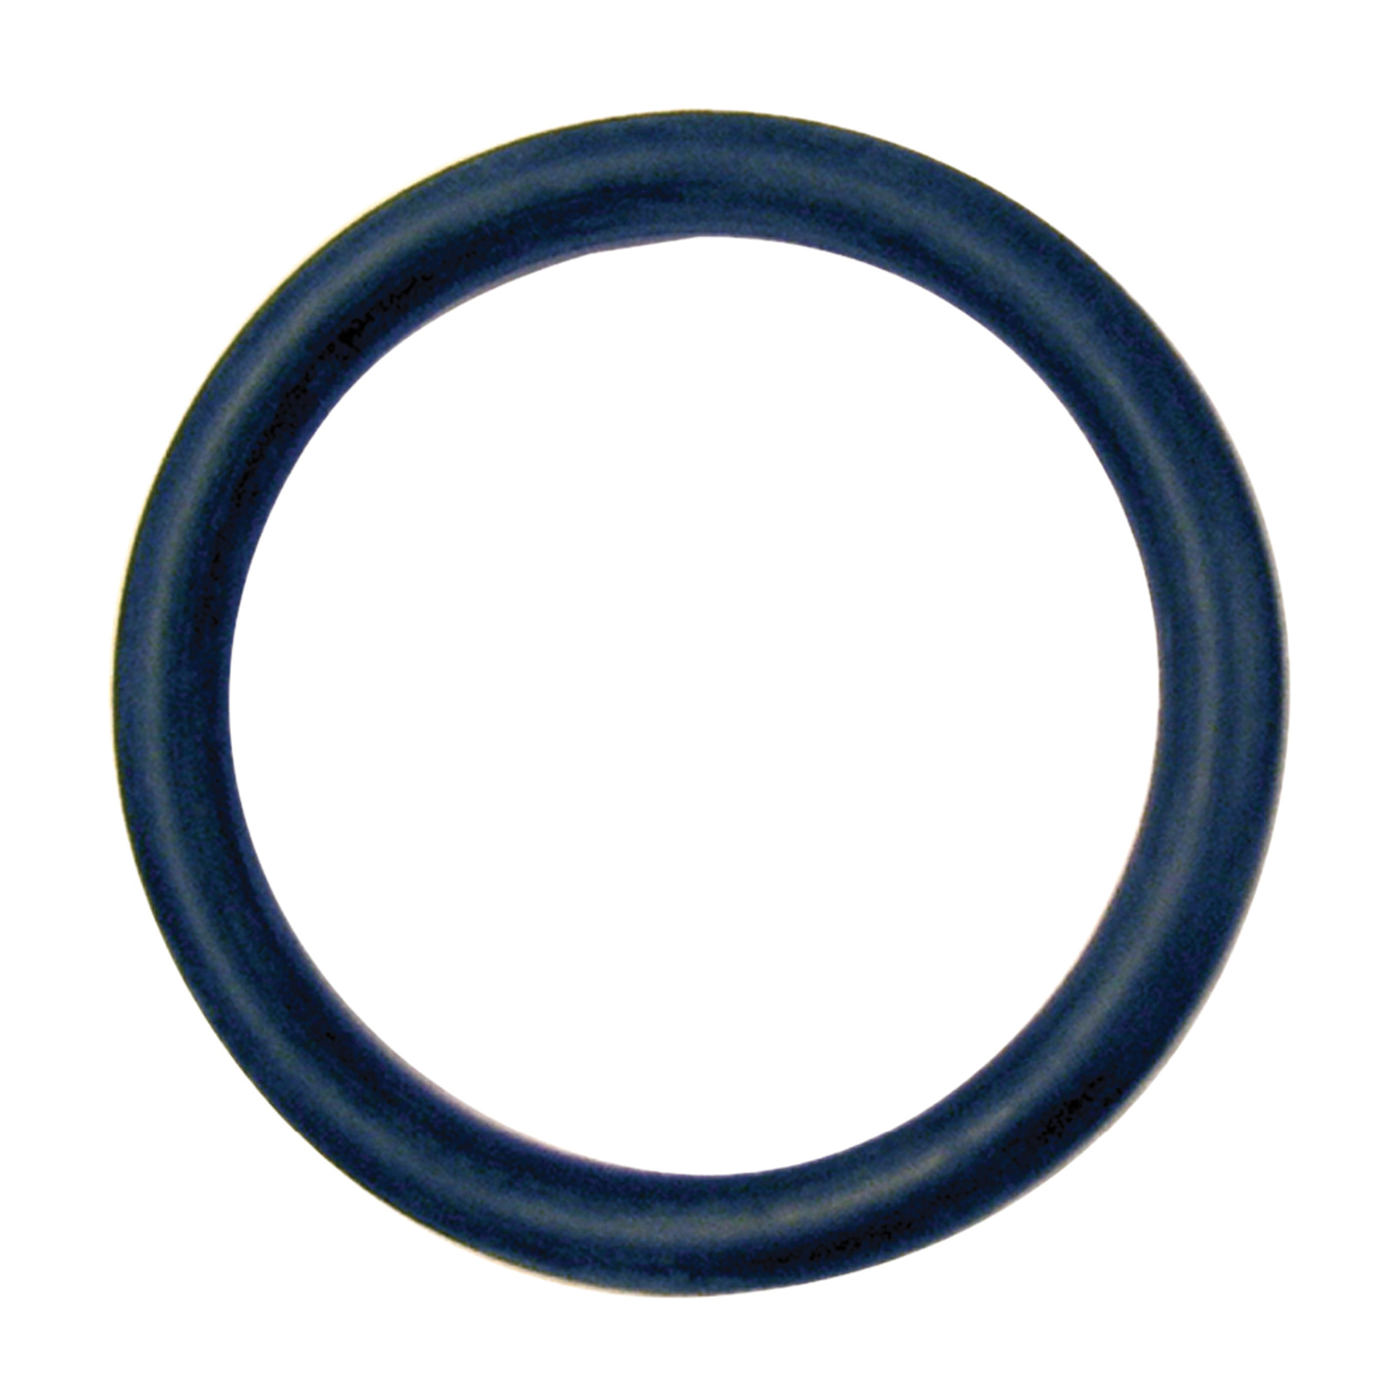 780051 Faucet O-Ring, 1 in ID x 1-3/16 in OD Dia, 3/32 in Thick